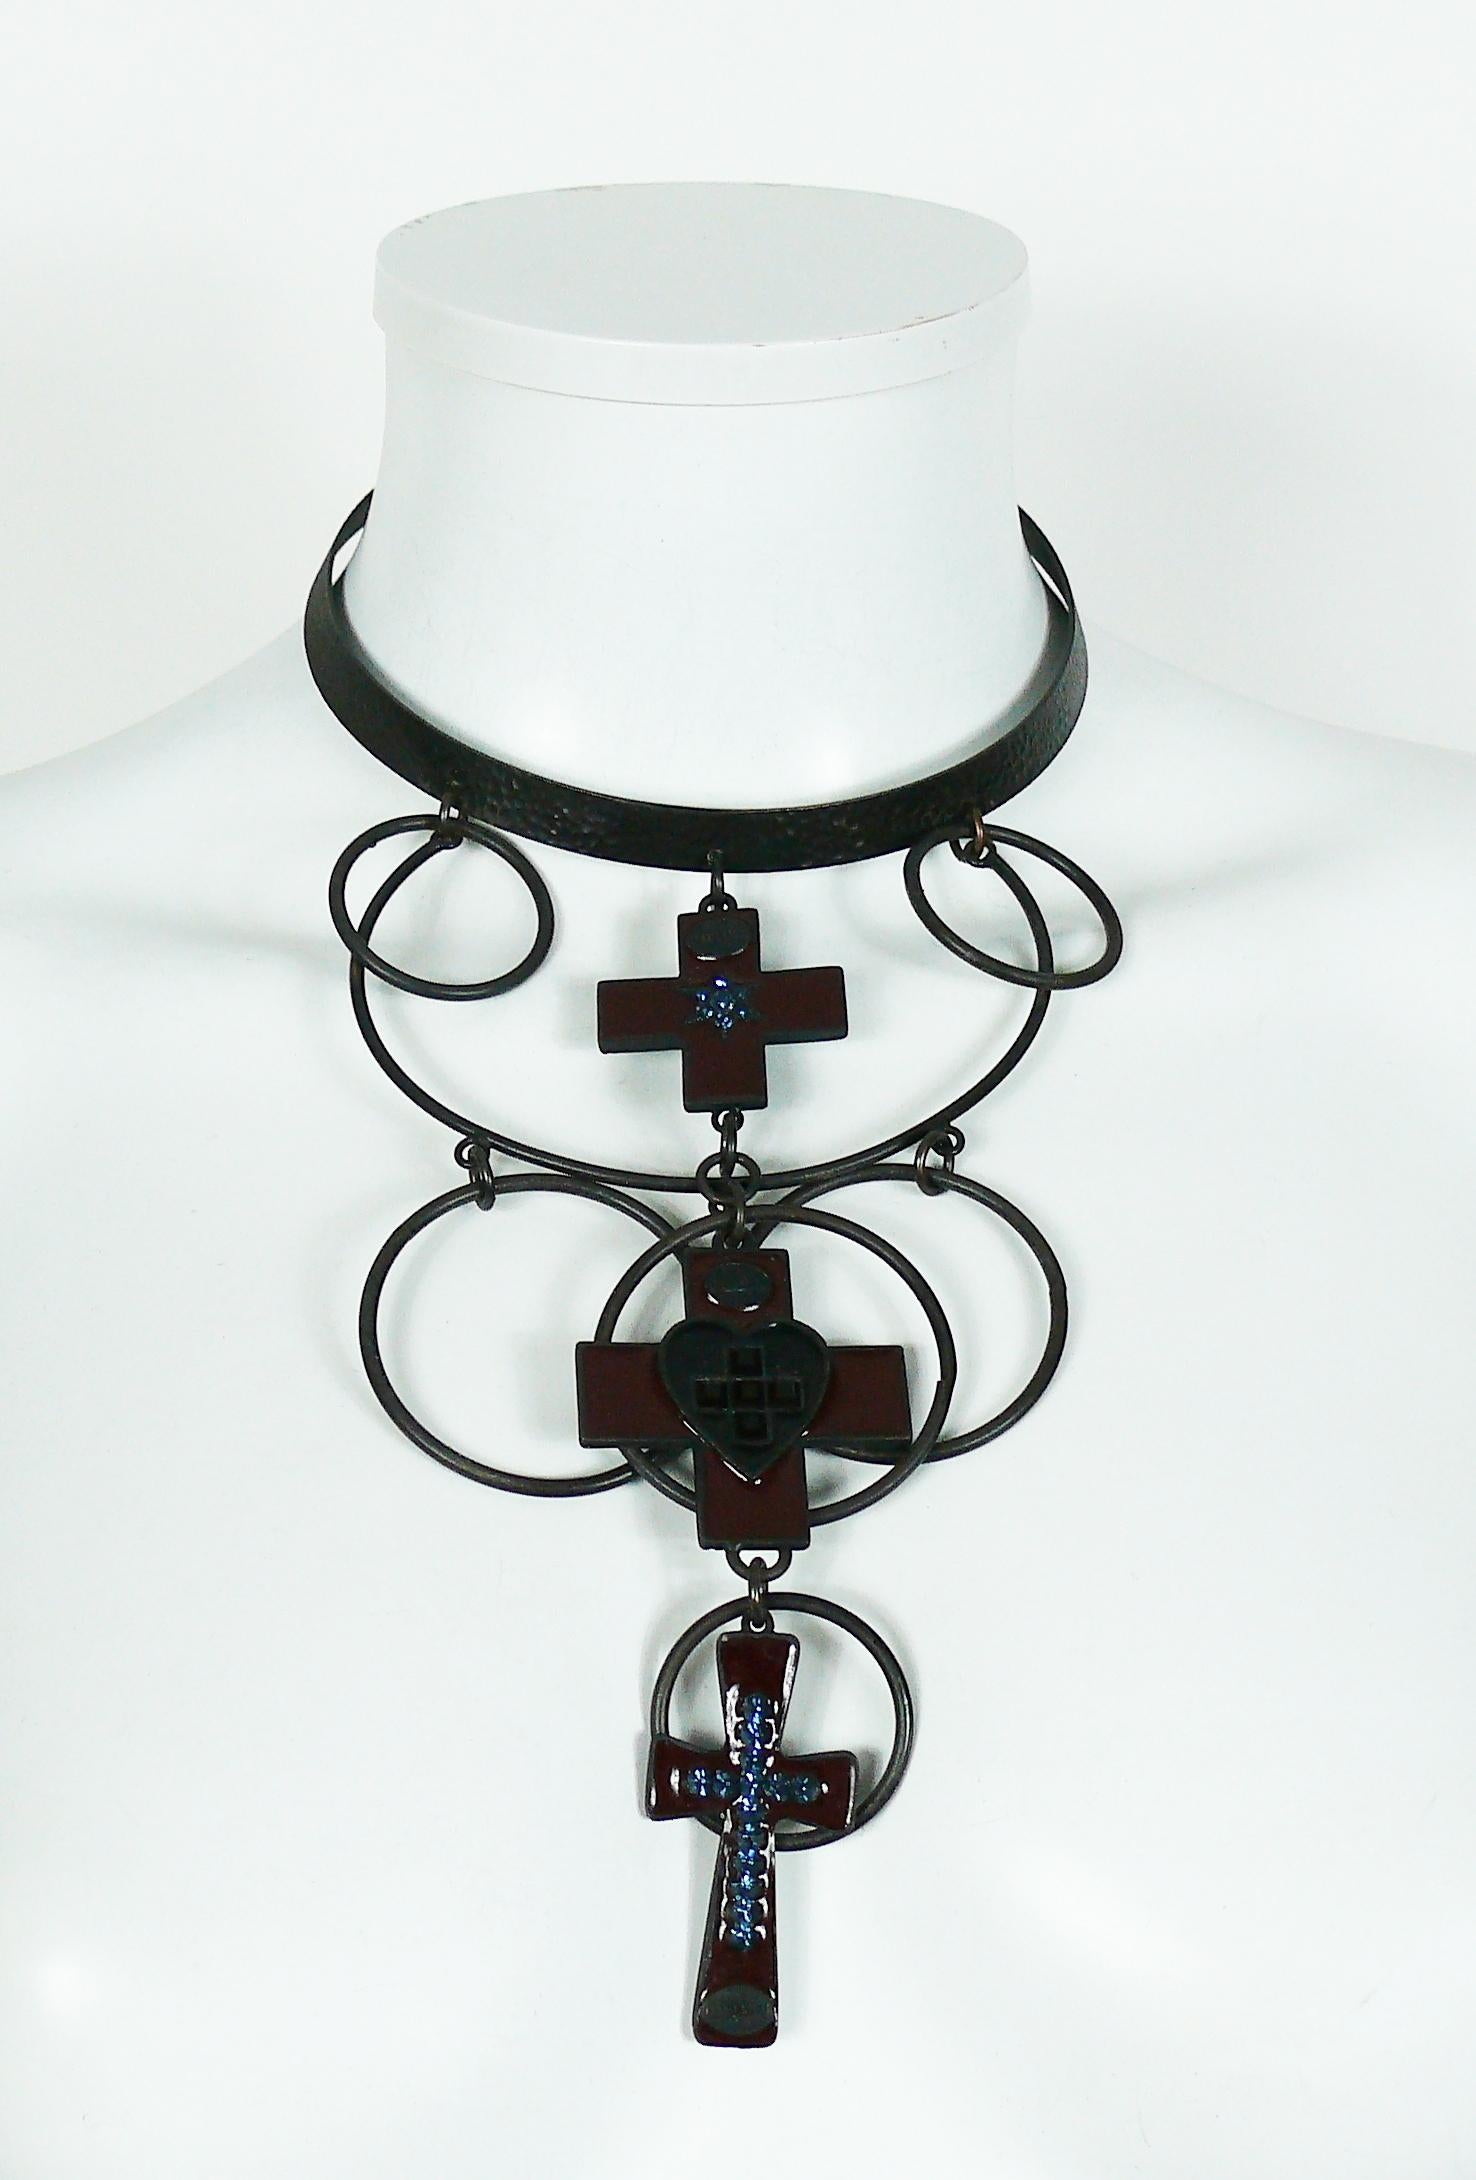 Jean Paul Gaultier vintage rare choker necklace featuring rings and enameled crosses with crystal embellishment.

Lobster clasp clorure.

Marked GAULTIER.

Indicative measurements : inner circumference approx. 36.44 cm (14.35 inches) / drop approx.